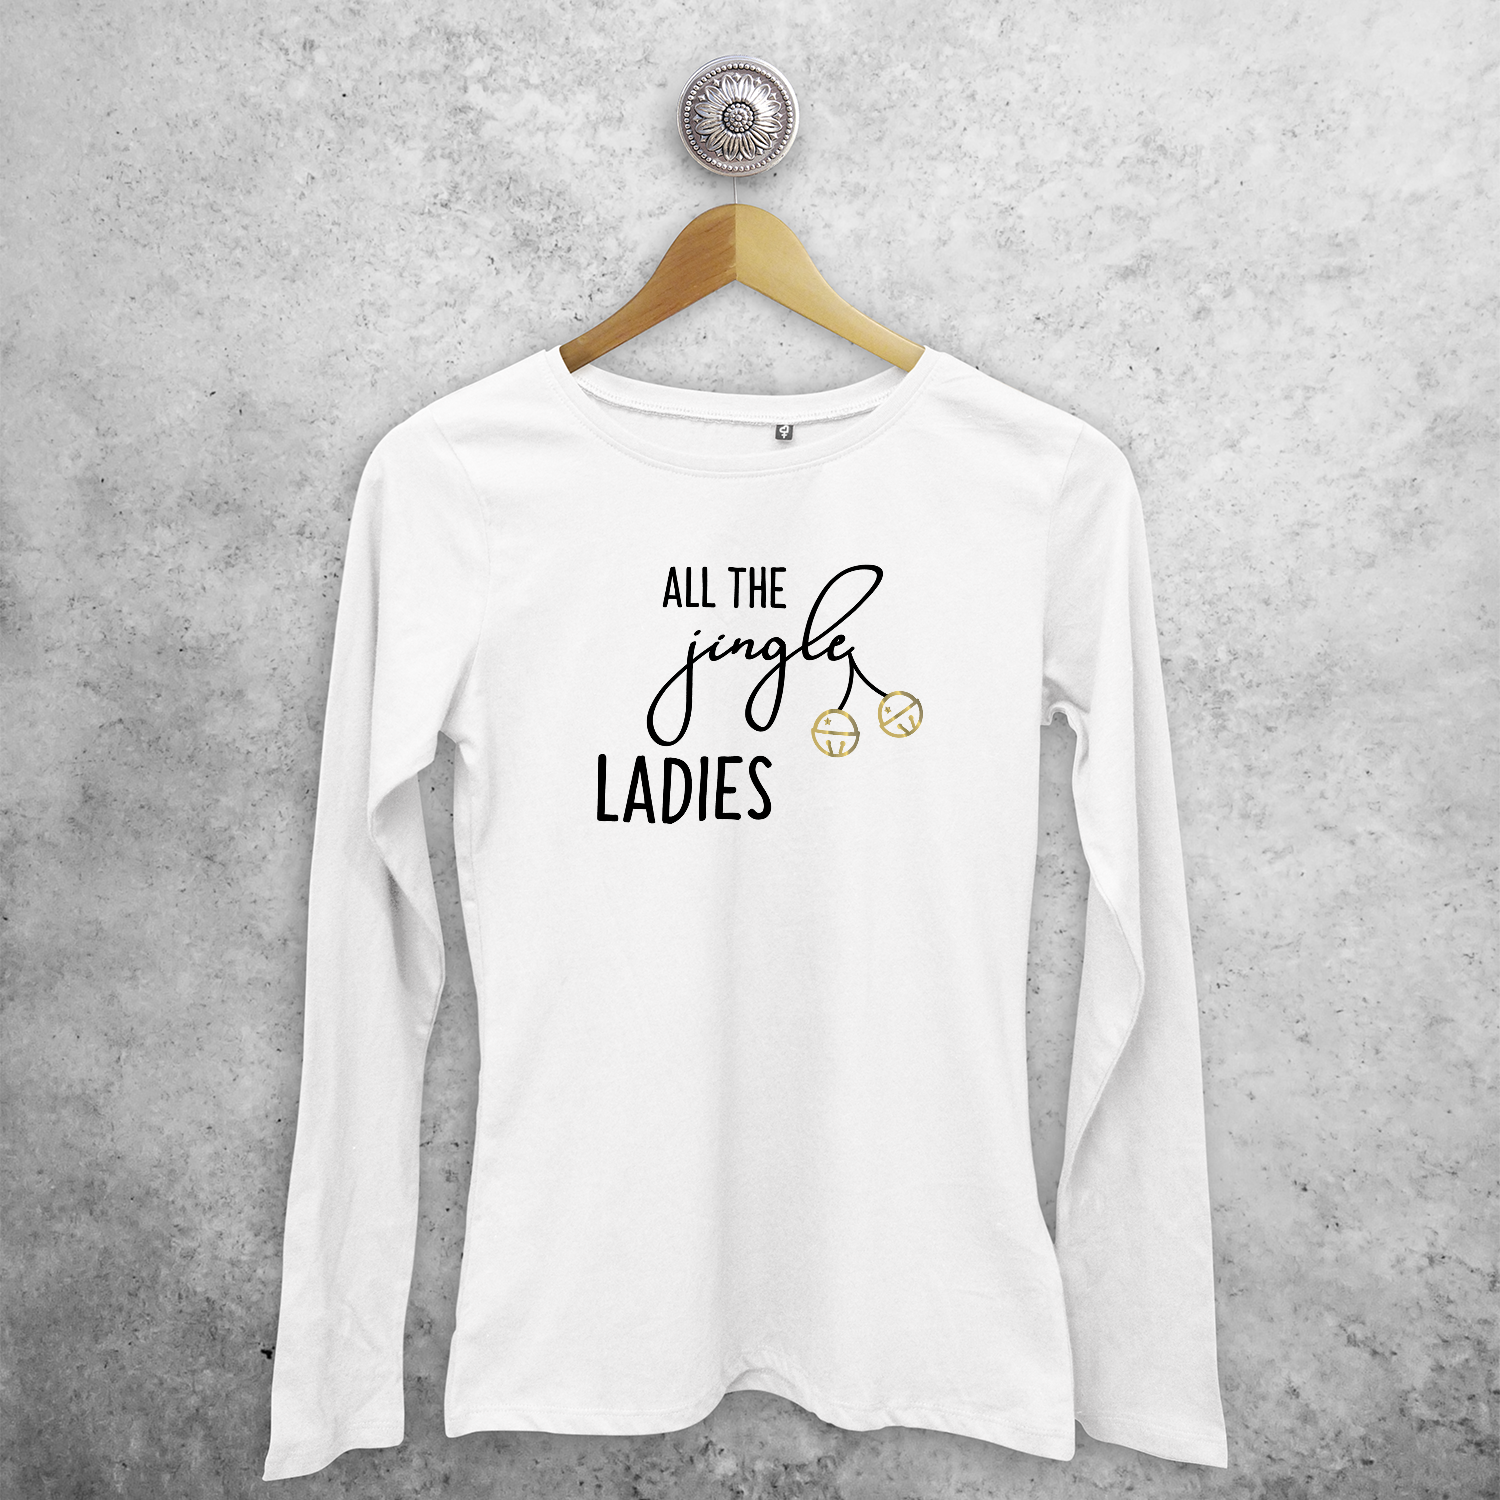 Adult shirt with long sleeves, with ‘All the jingle ladies’ print by KMLeon.